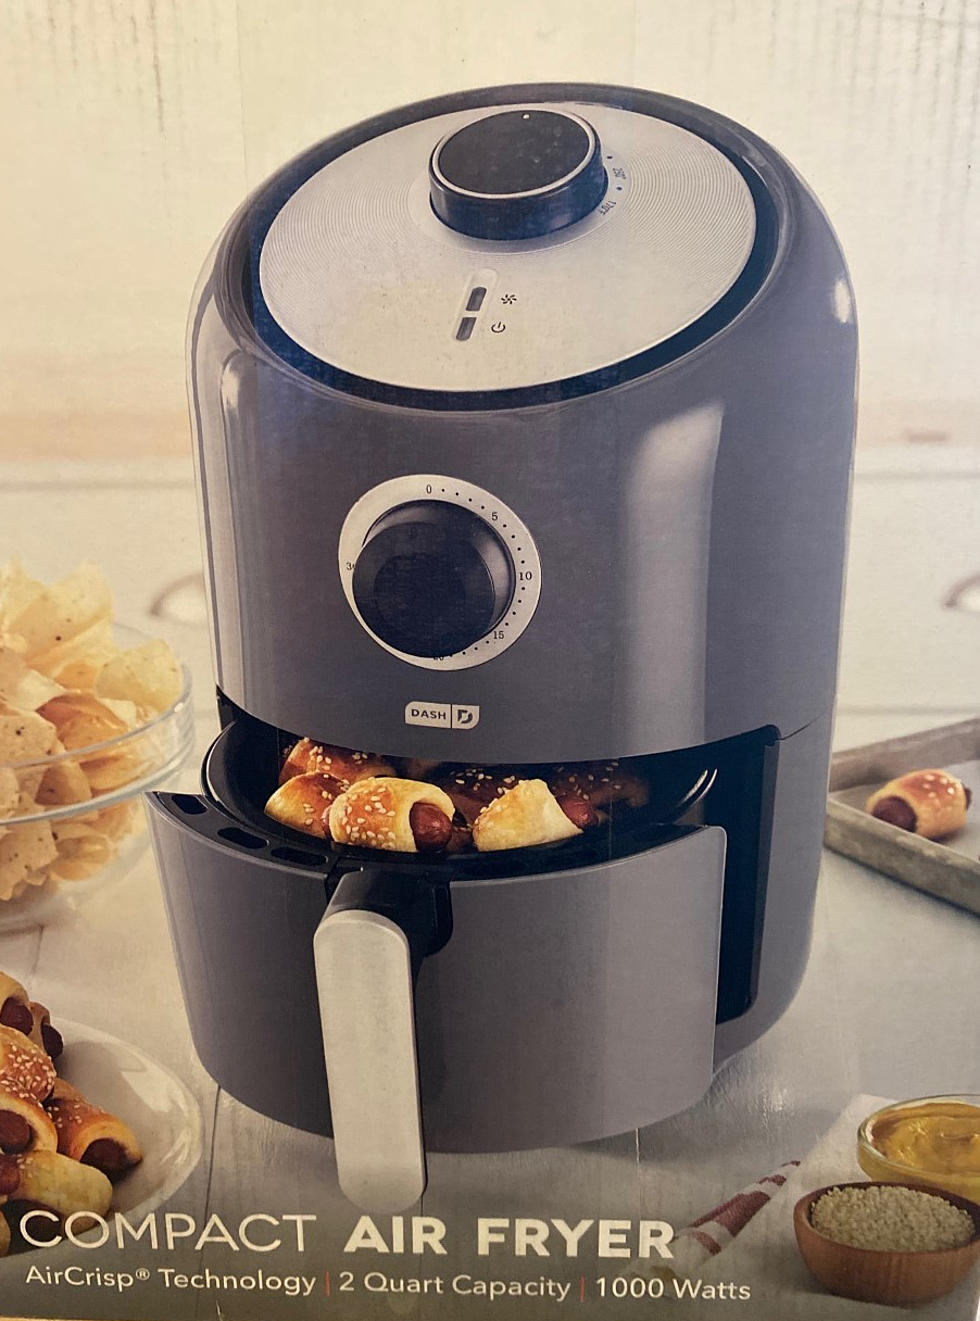 Finally Got an Air Fryer…What Do You Make in Yours?